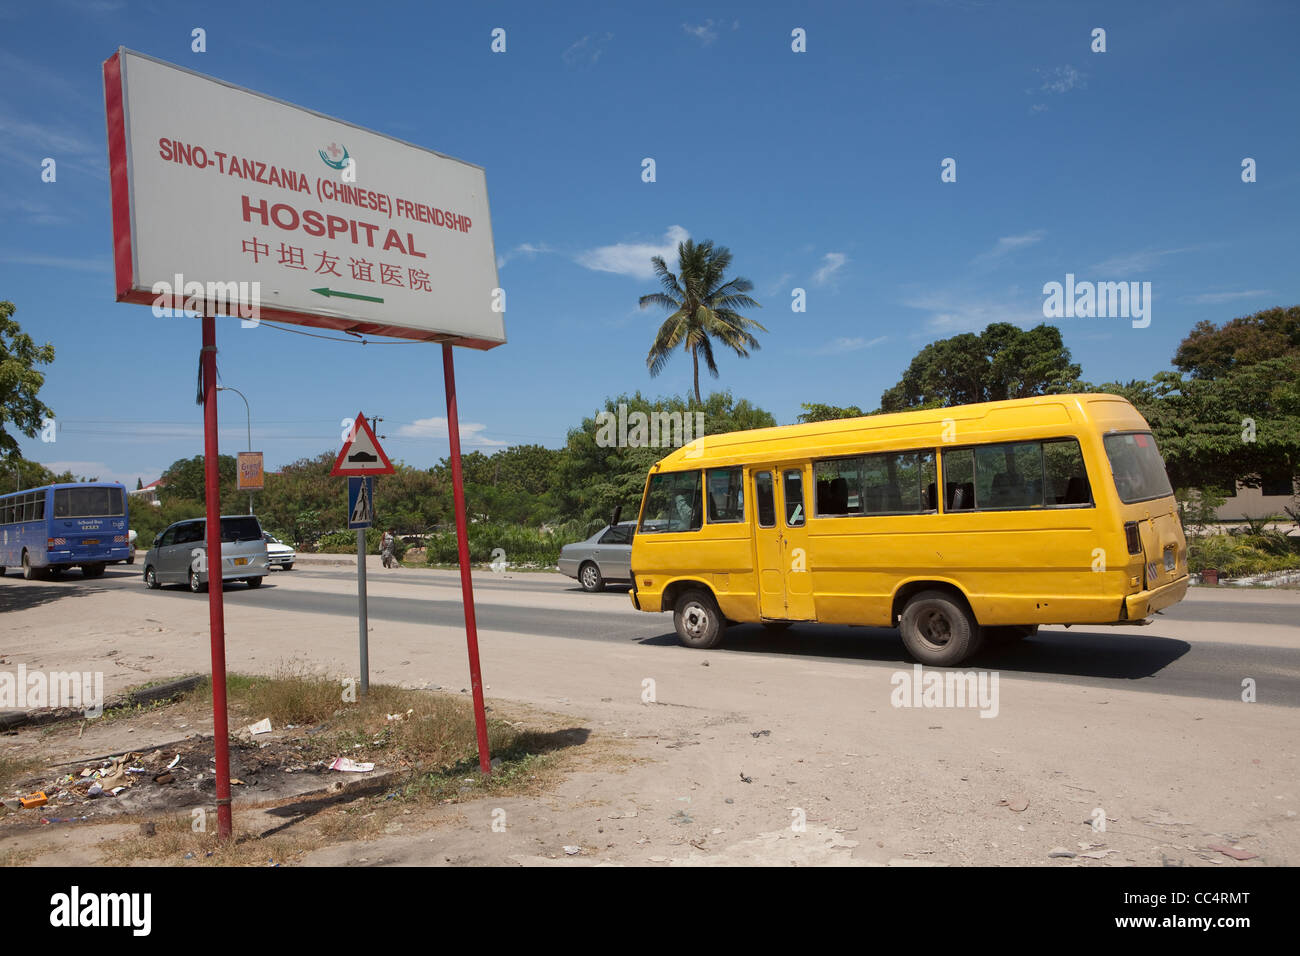 A Chinese-run hospital in Tanzania sits along a busy street in Dar es Salaam. Stock Photo